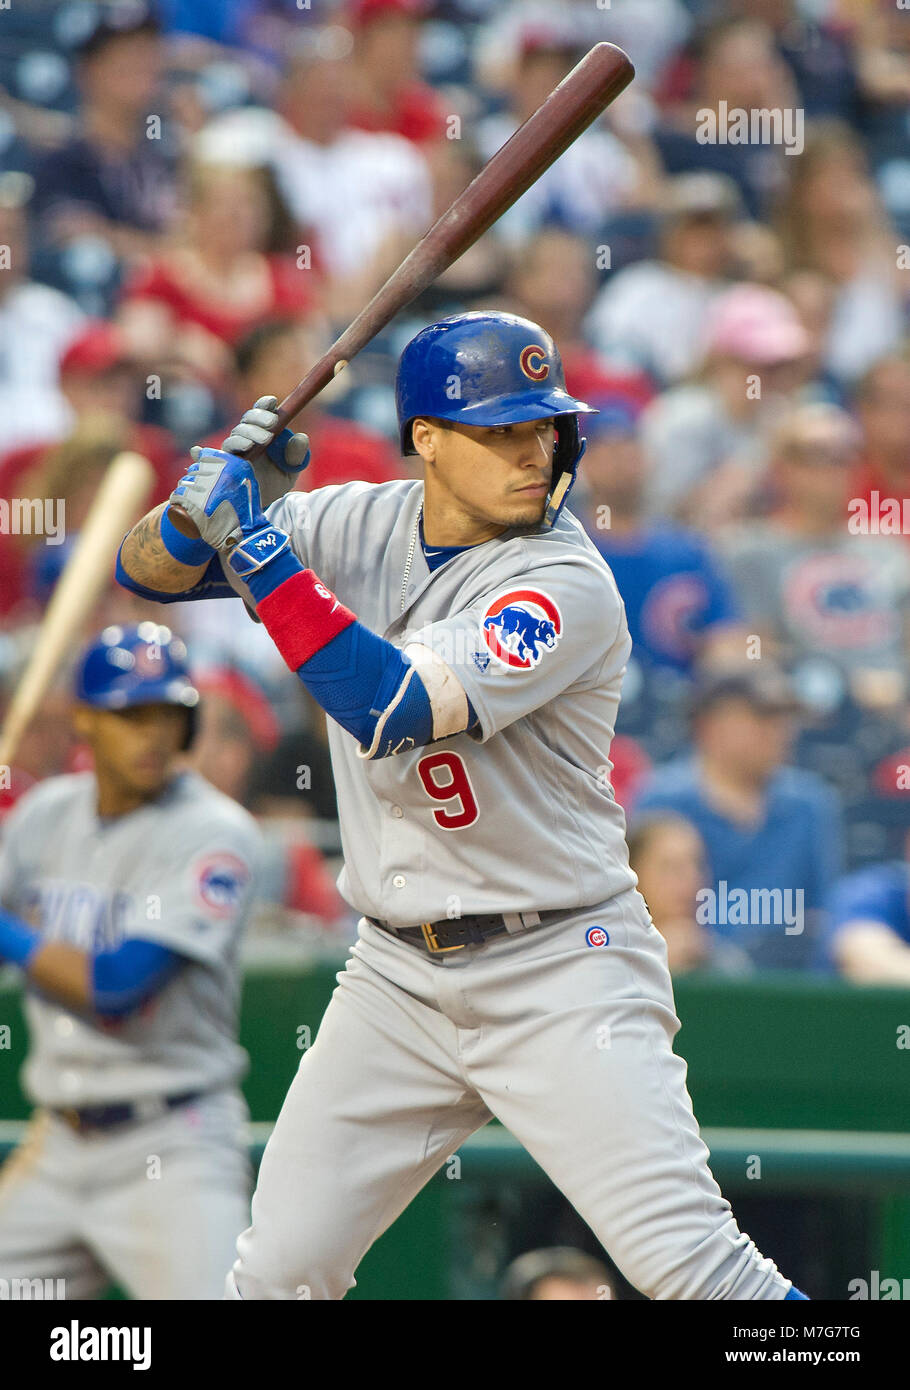 The Chicago Cubs' Javier Baez hits a grand slam in the sixth inning against  the New York Mets at Wrigley Field in Chicago on Wednesday, April 21, 2021.  (Photo by Chris Sweda/Chicago